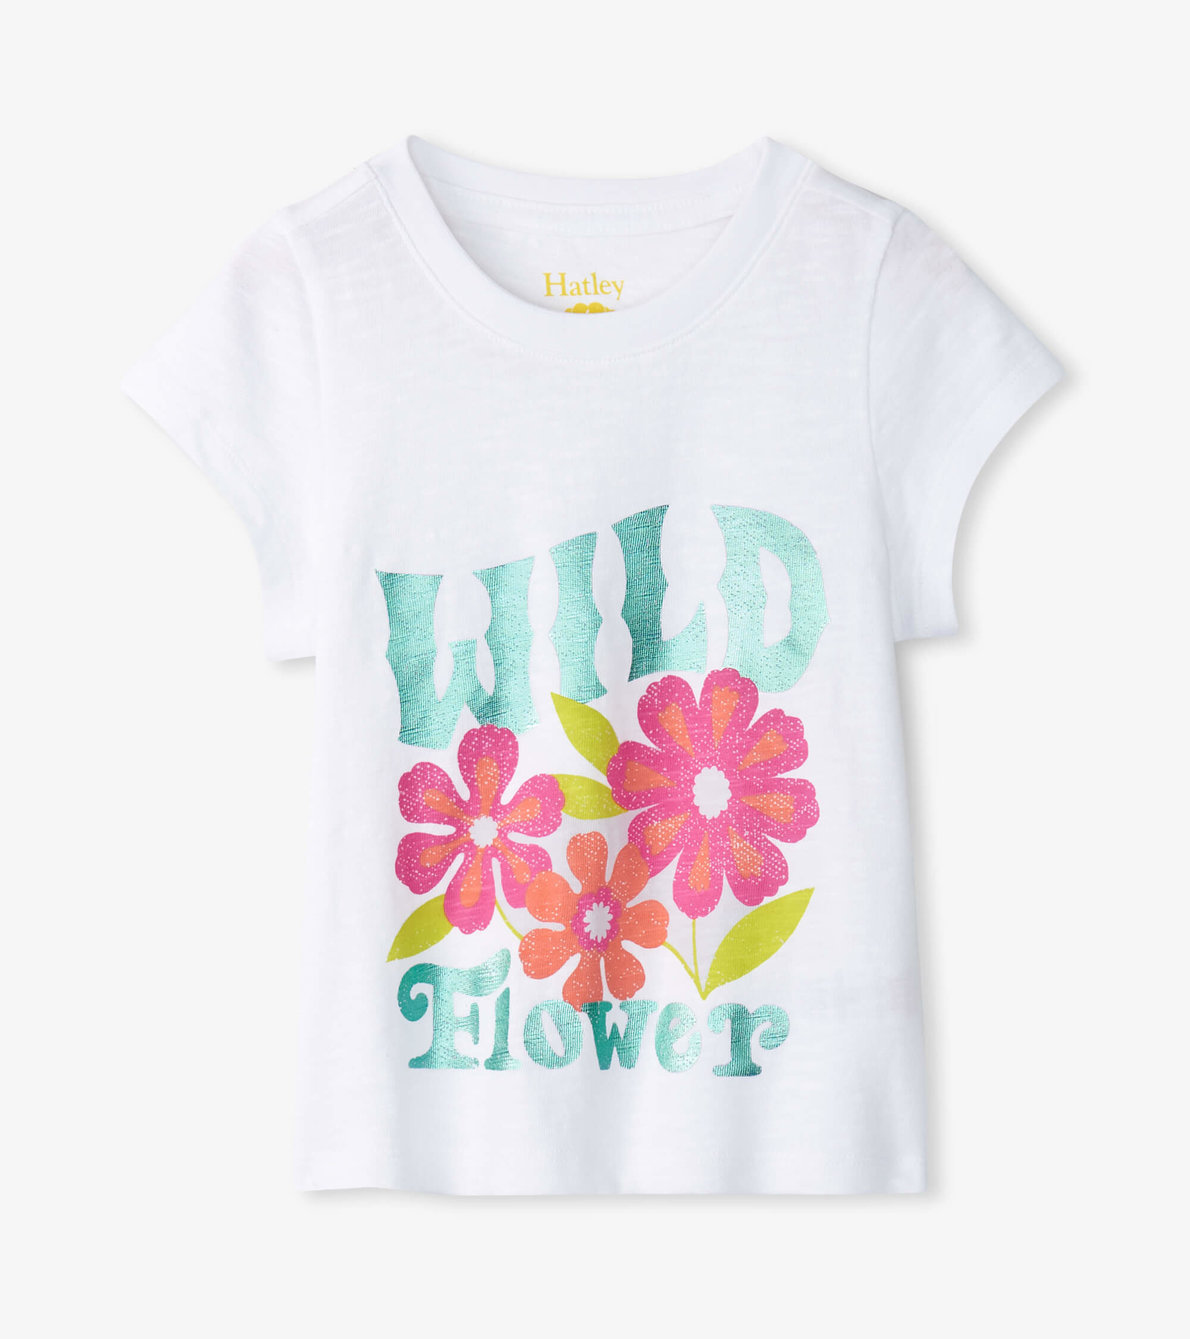 View larger image of Girls Wild Flower Graphic Tee